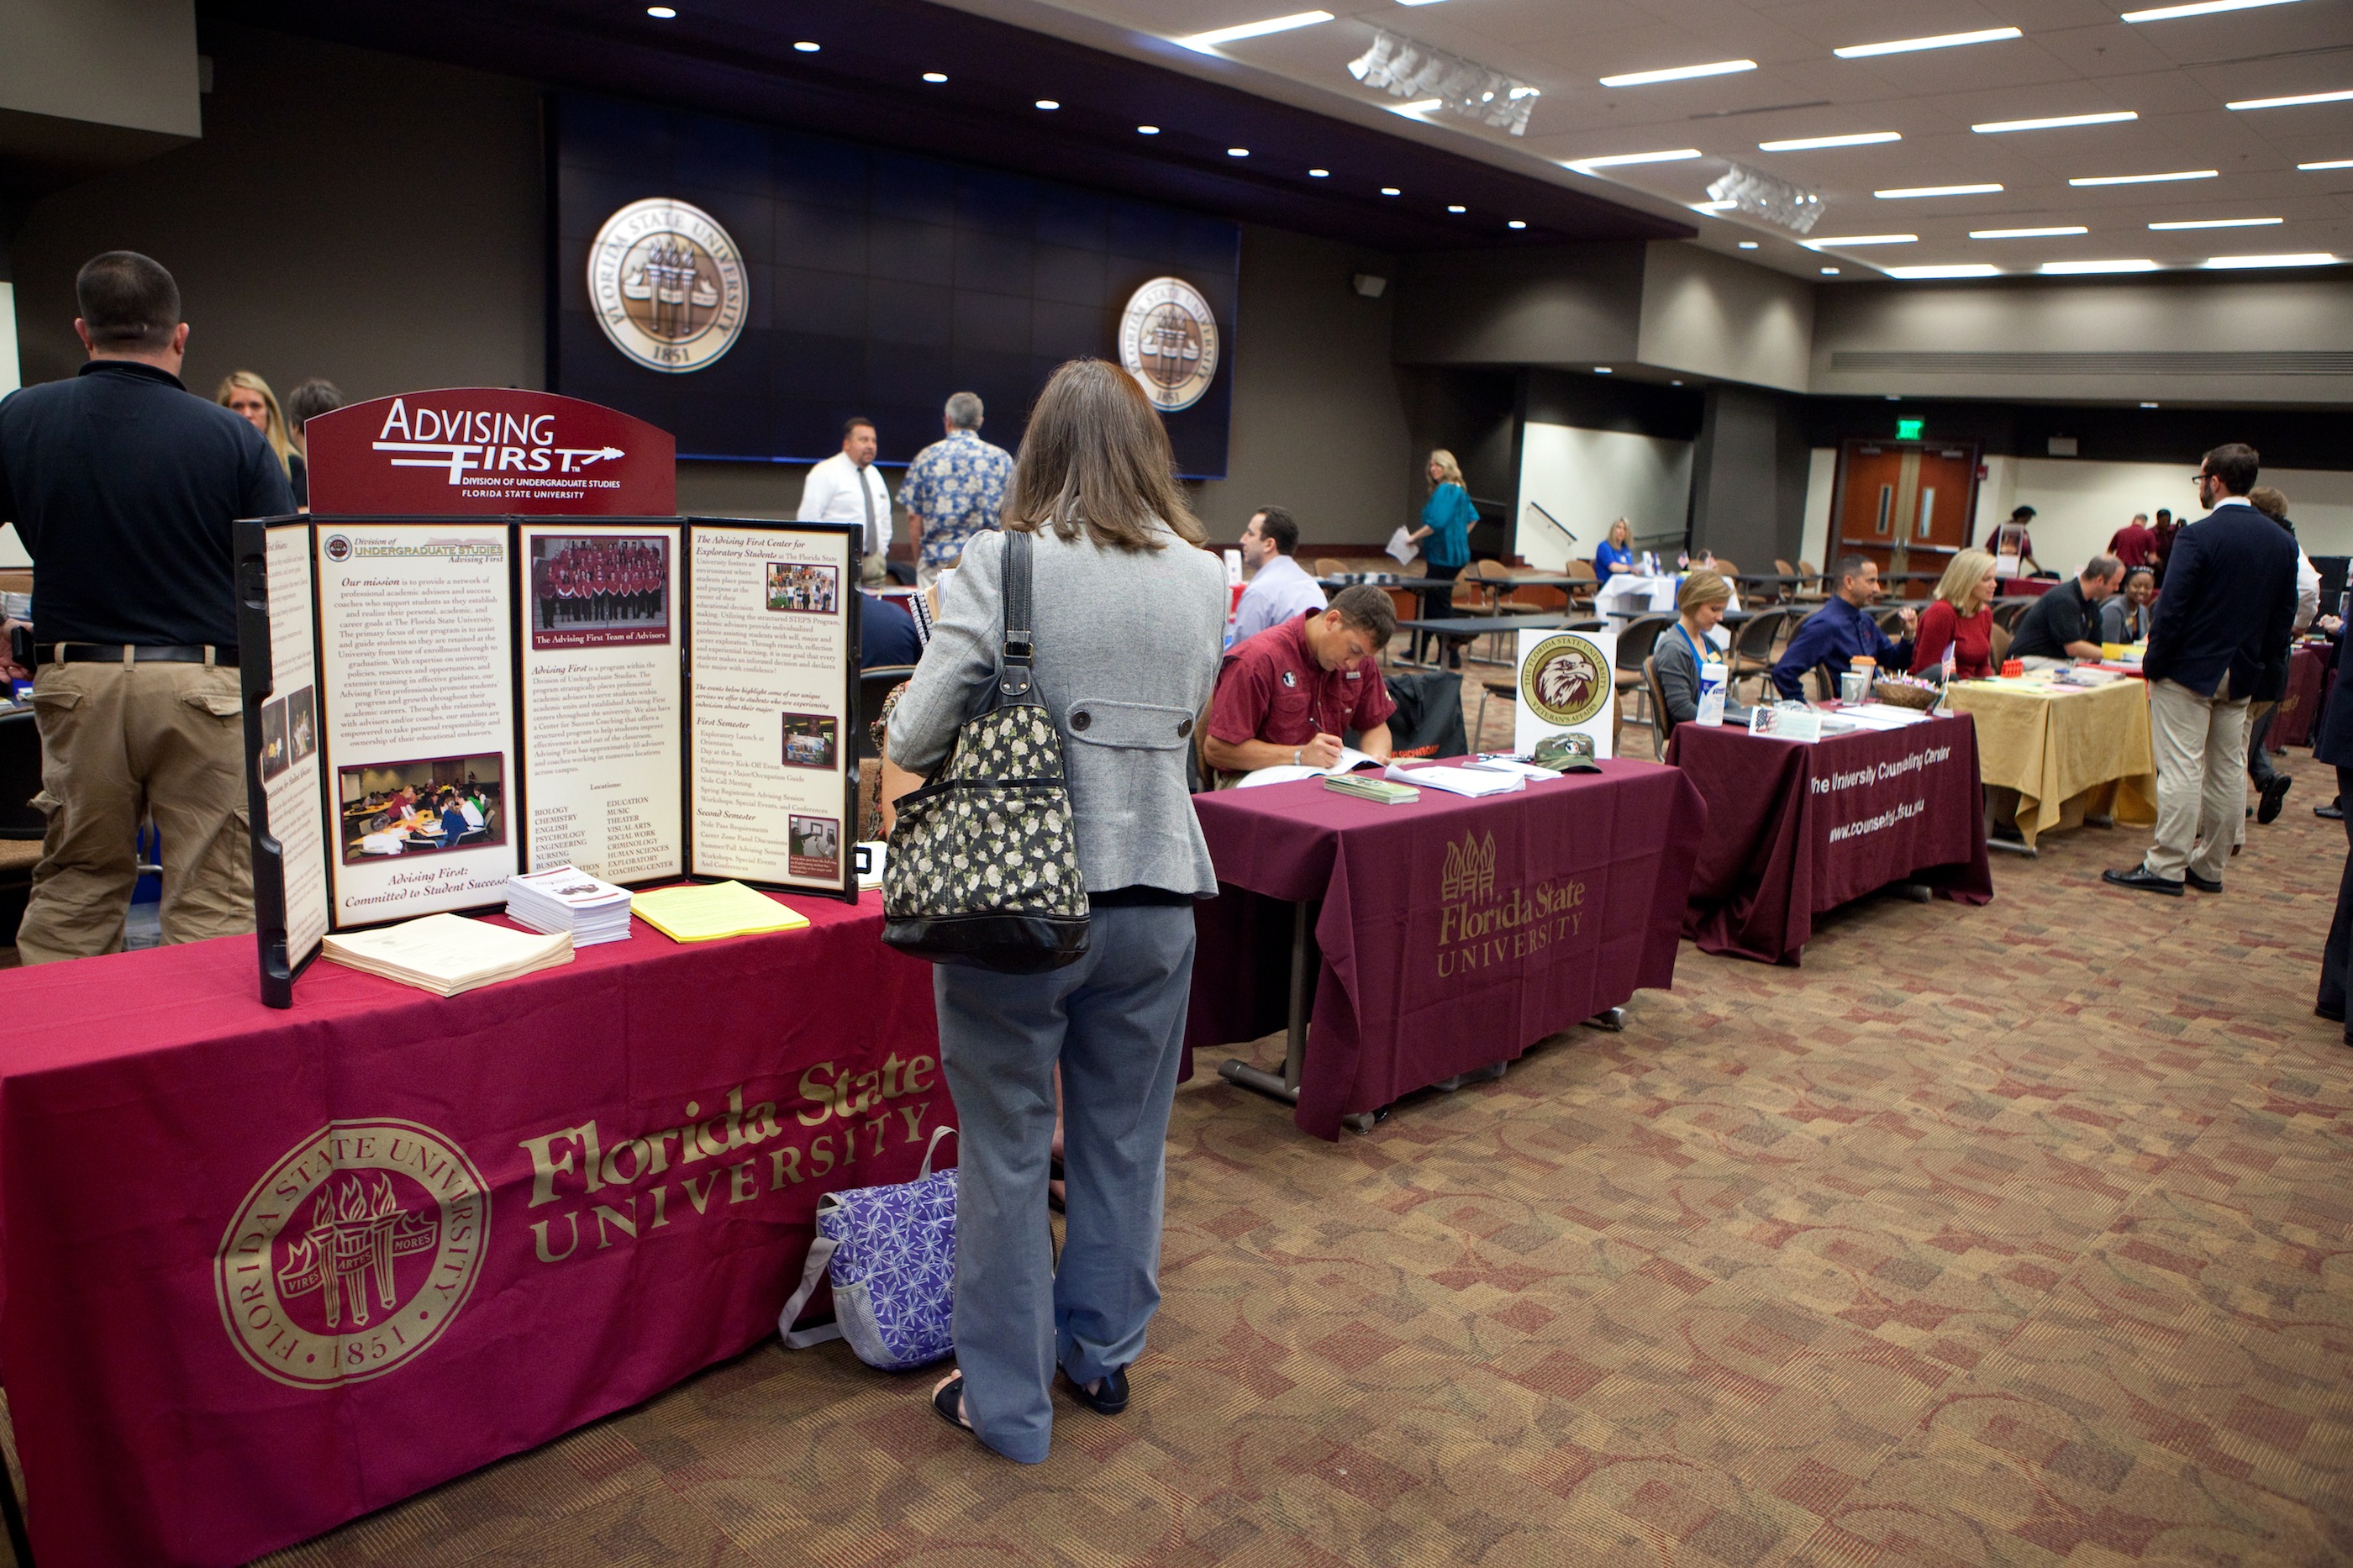 A broad gathering of administrators, faculty members, academic advisers and other staffers were on hand at the inaugural Seminole Veteran Benefits Expo.